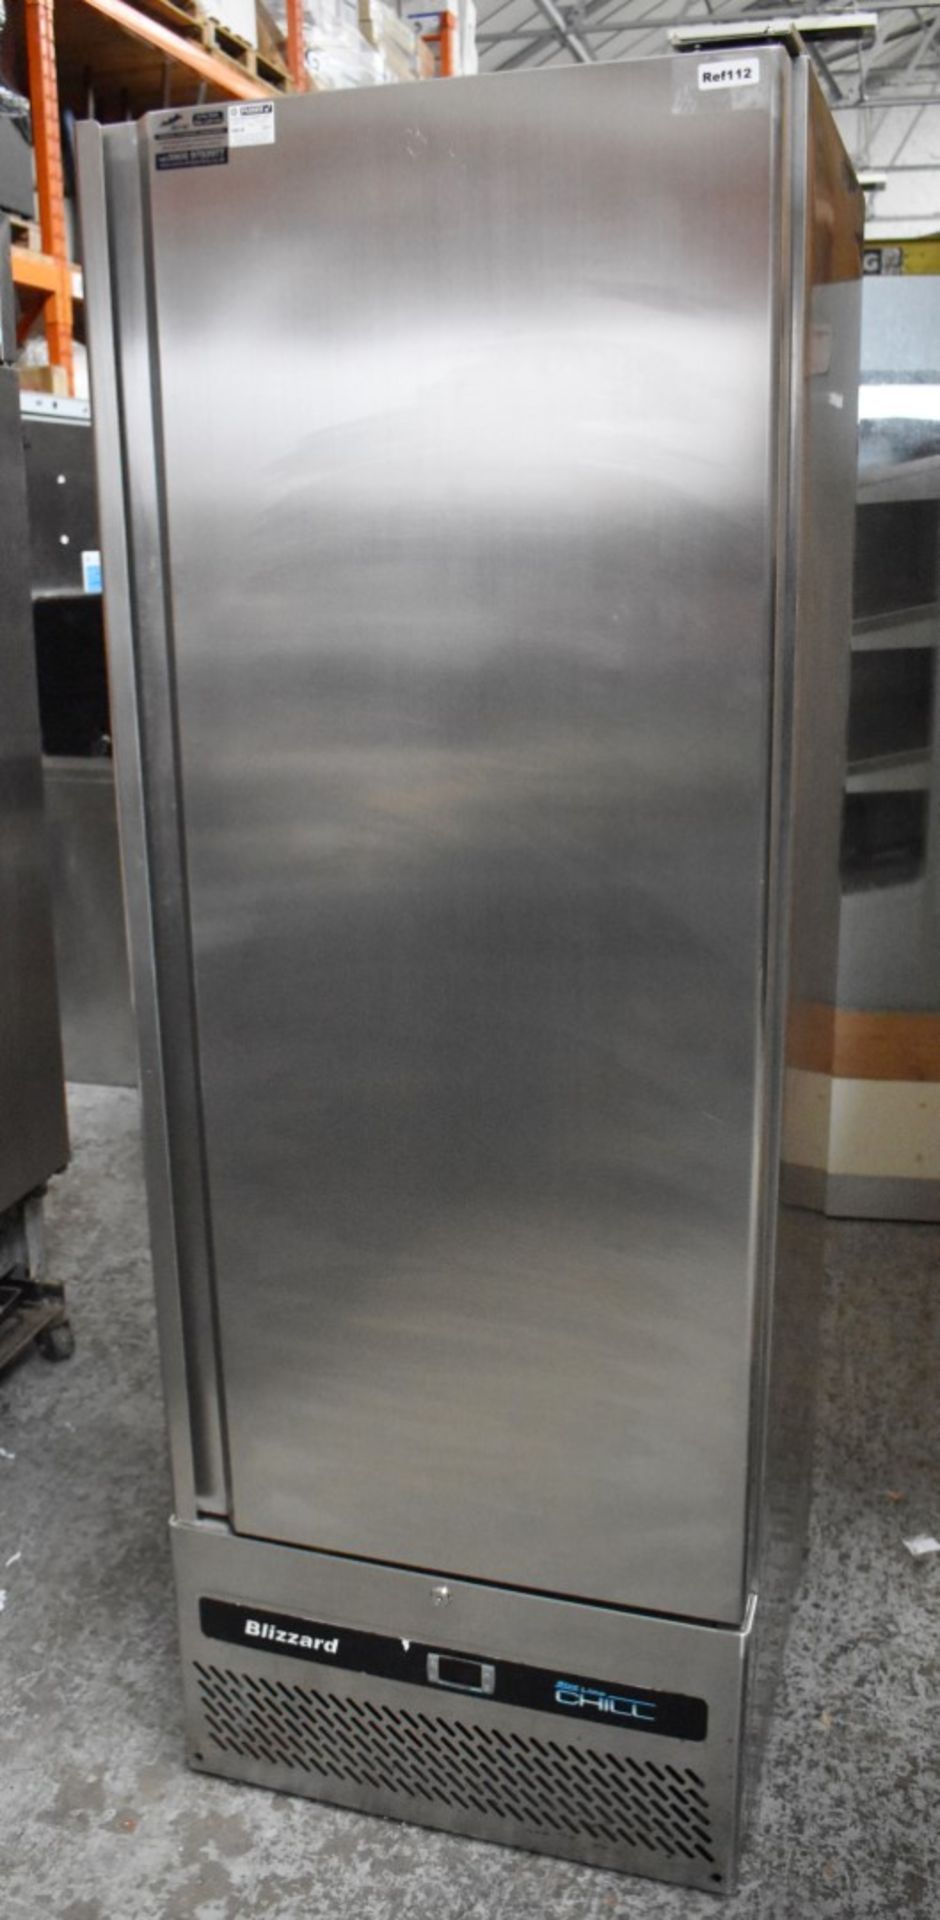 1 x Blizzard BCC400 Upright Commercial Fridge - Stainless Steel Finish - 230v - H200 x W68 x D71 cms - Image 6 of 7